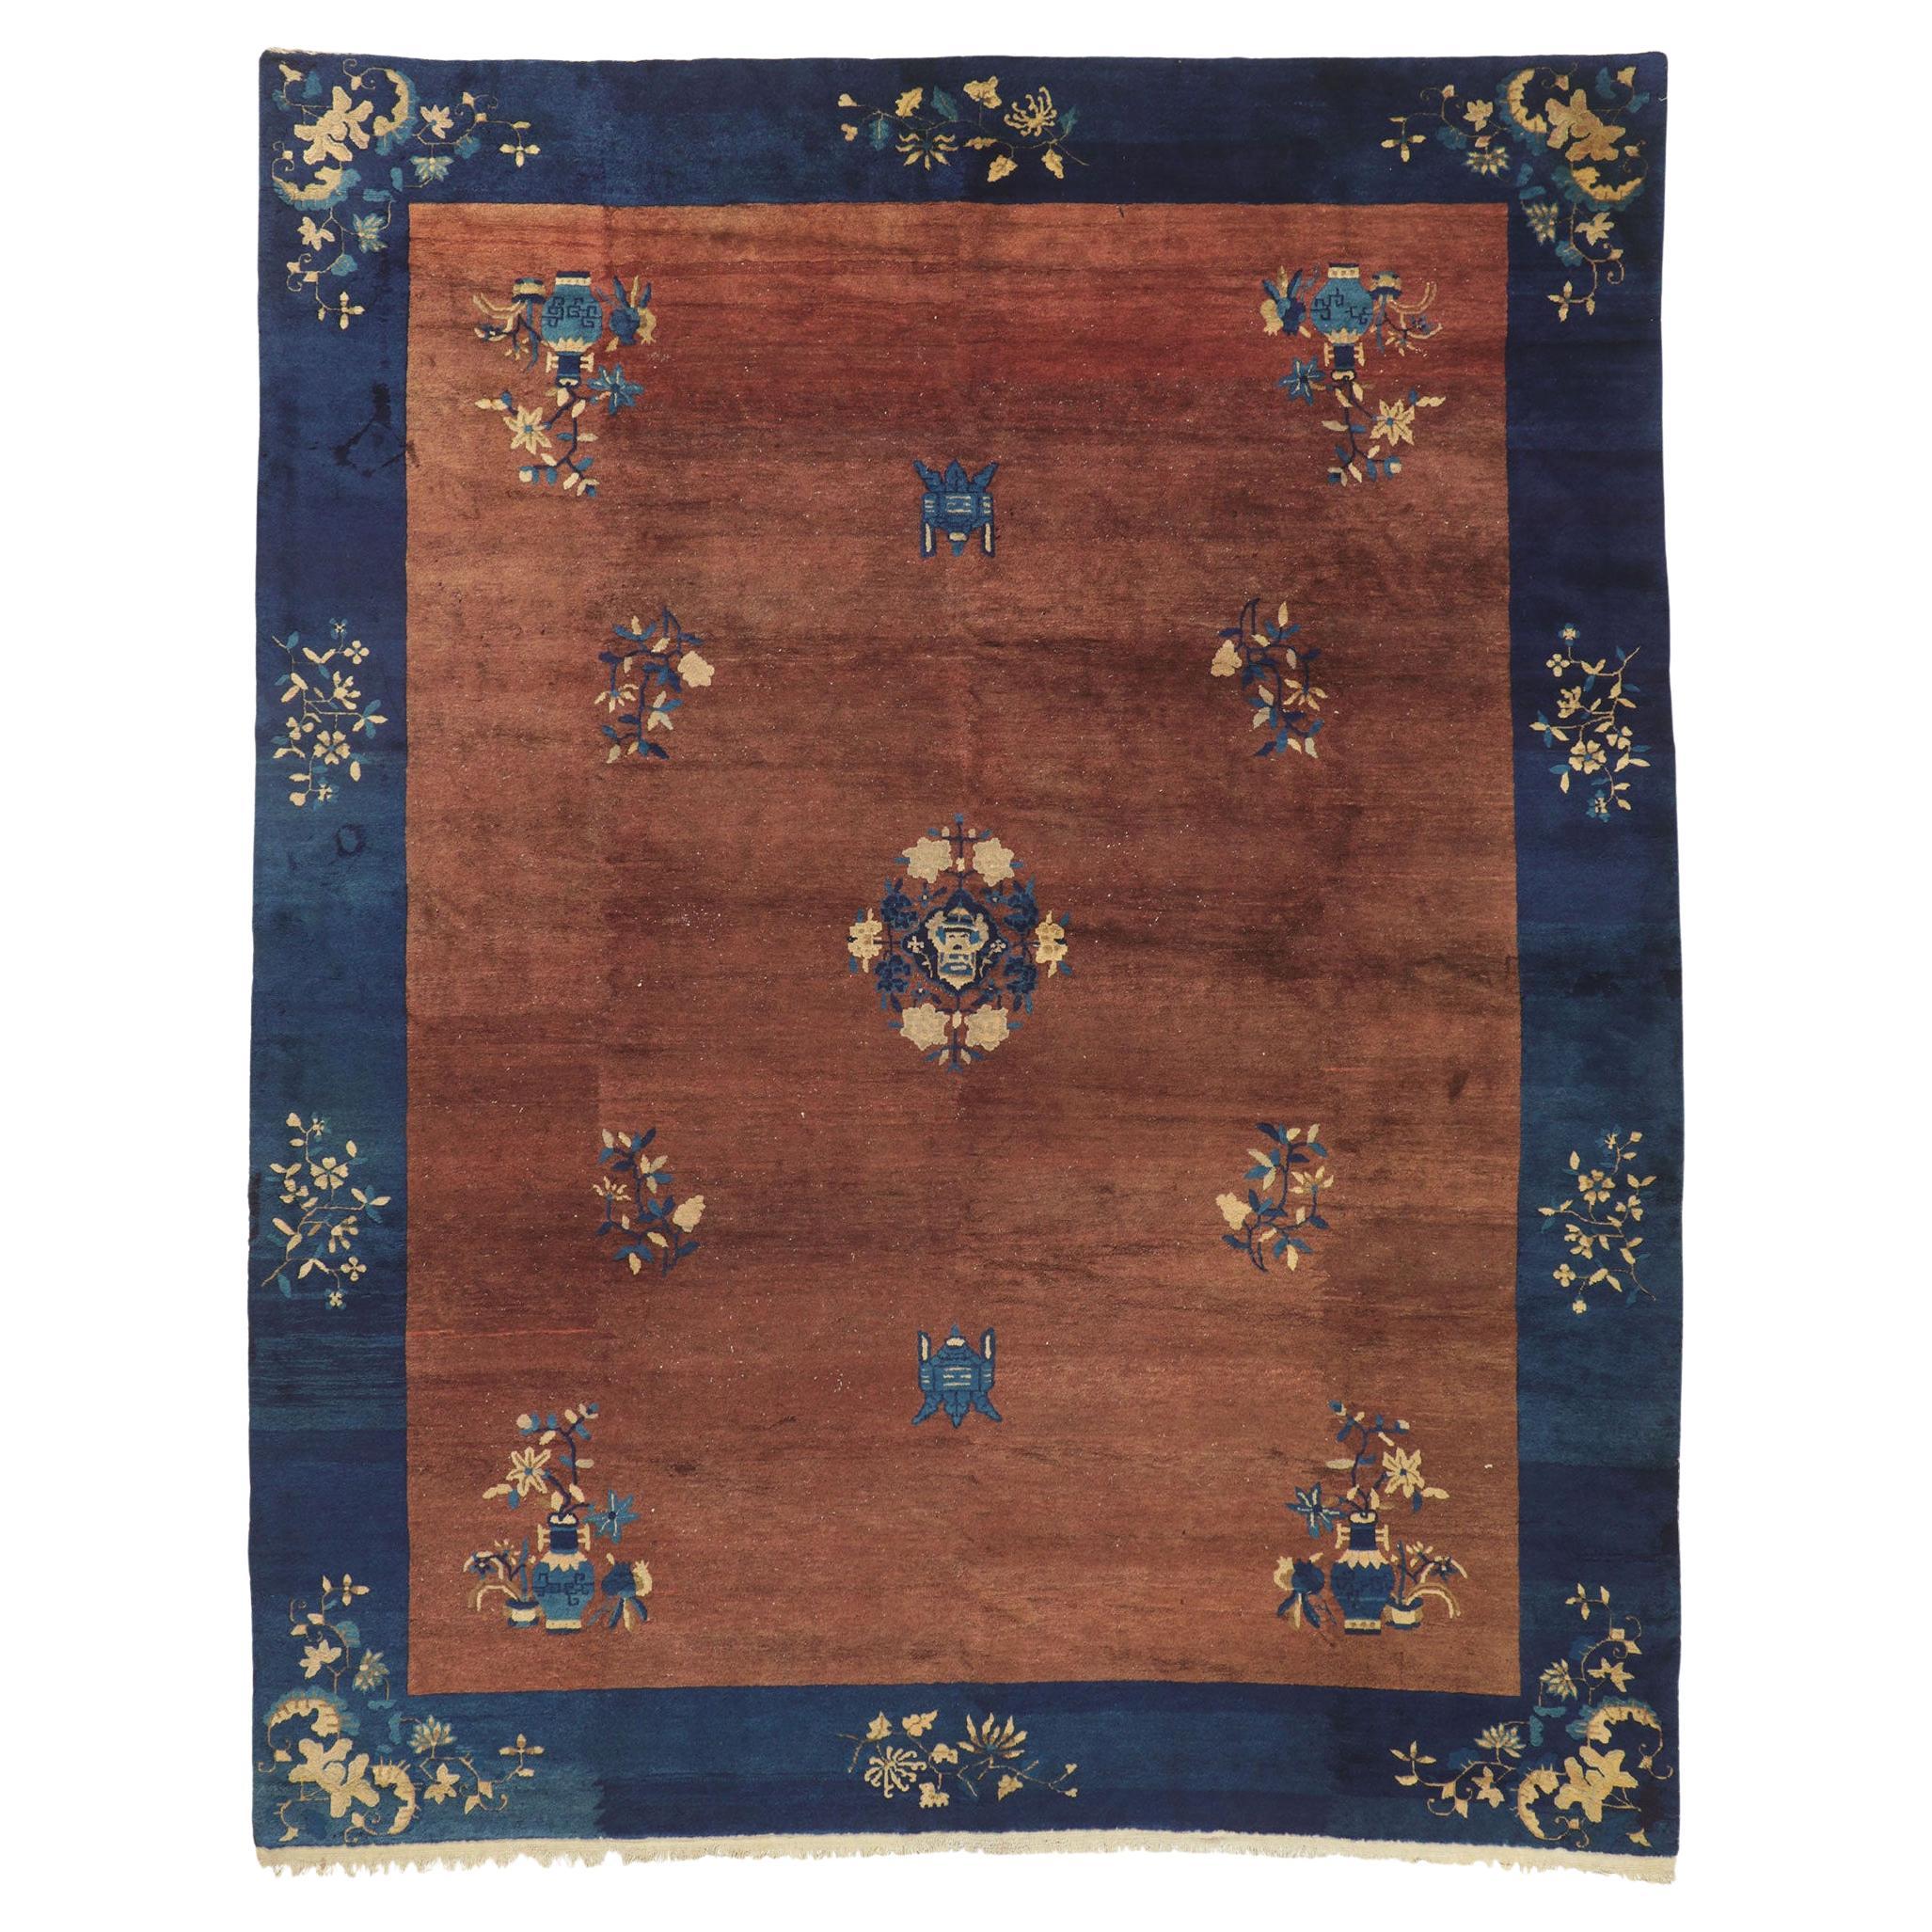 Antique Chinese Peking Rug, Chinoierie Chic Meets Earth-Tone Elegance